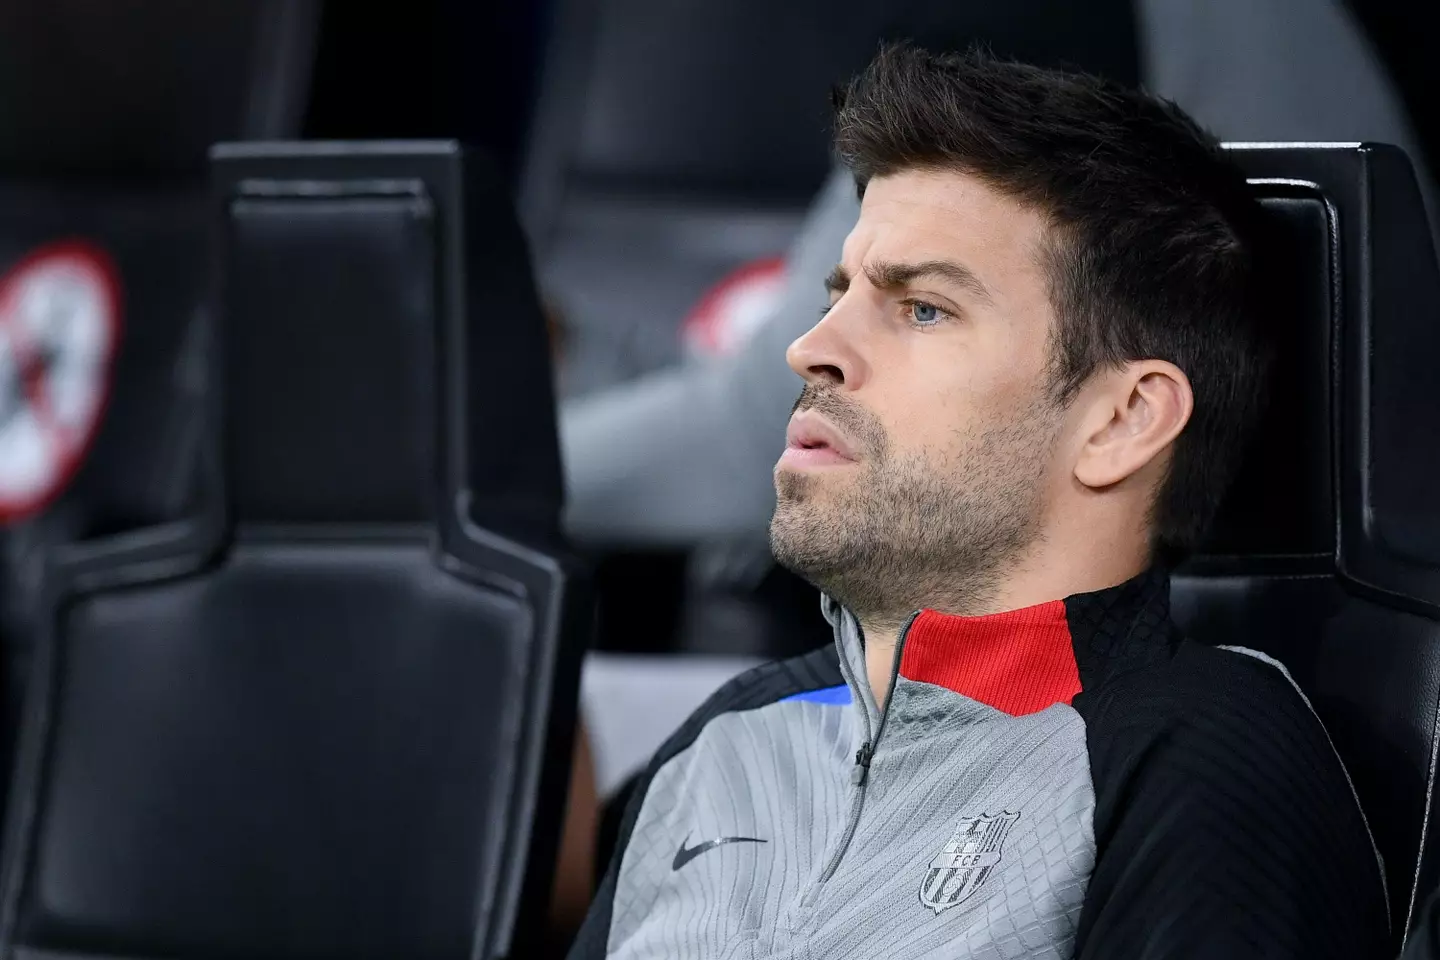 Pique's game time has been limited this season. (Image